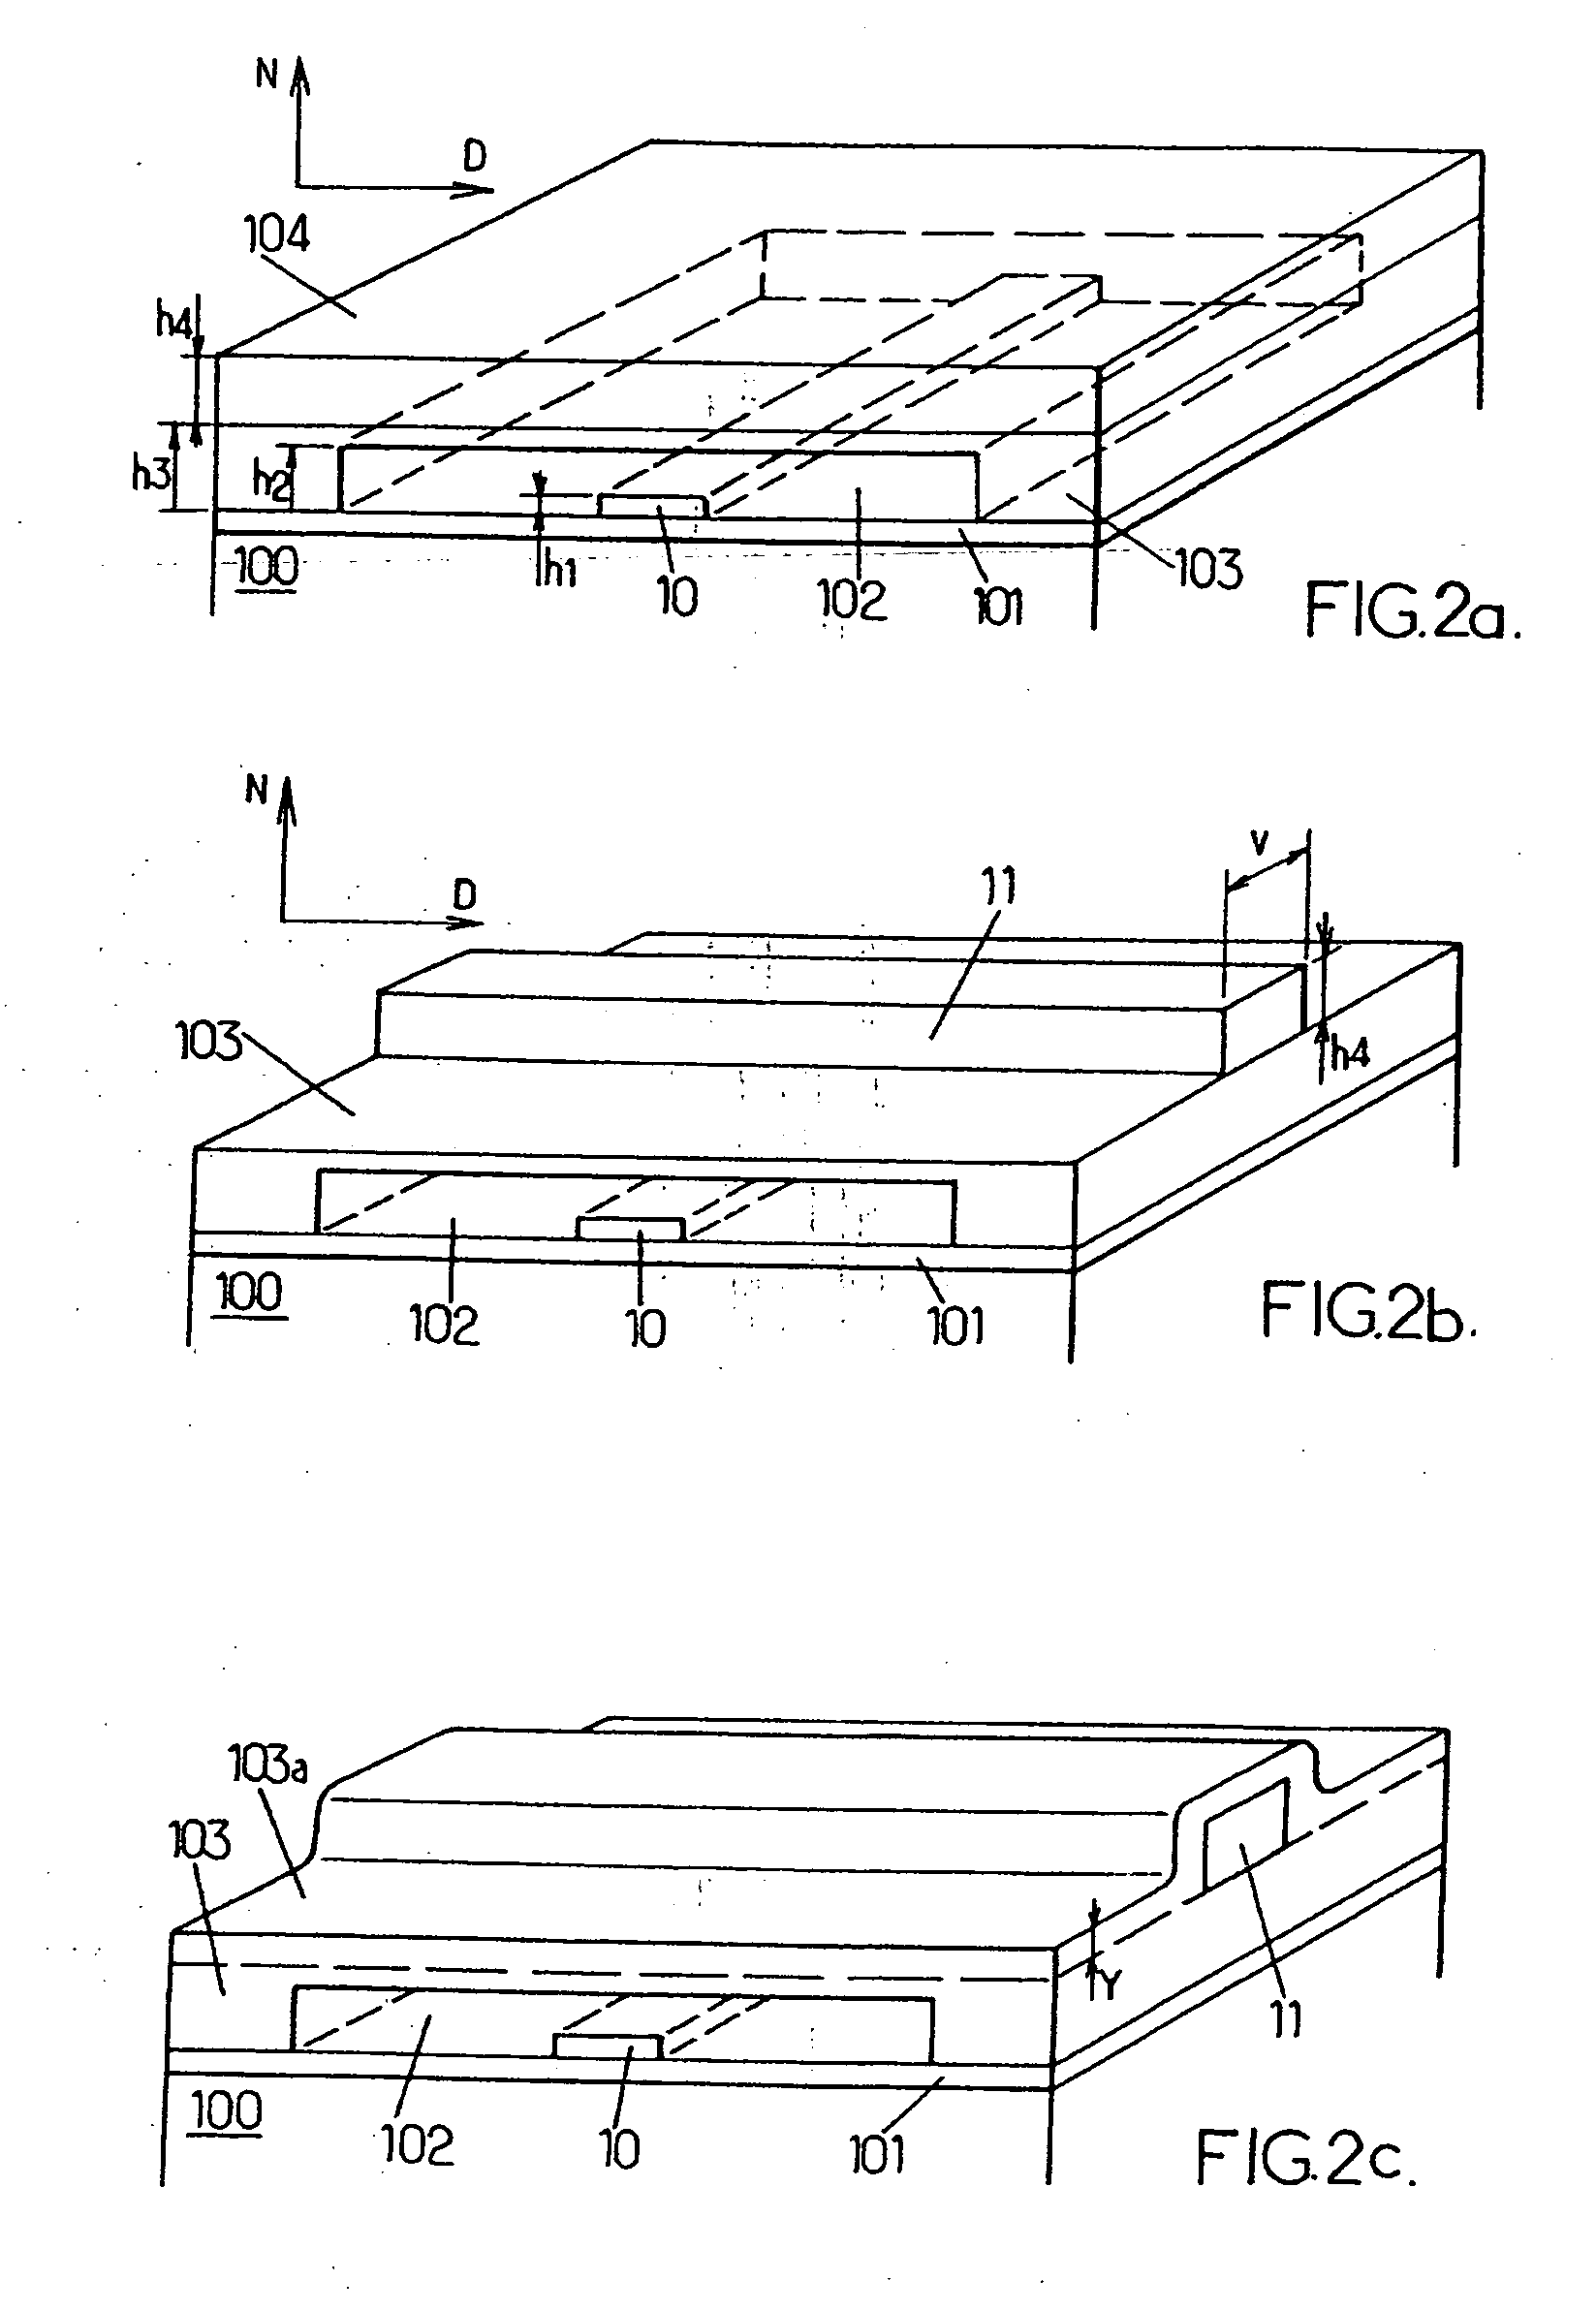 Microelectromechanical system comprising a beam that undergoes flexural deformation